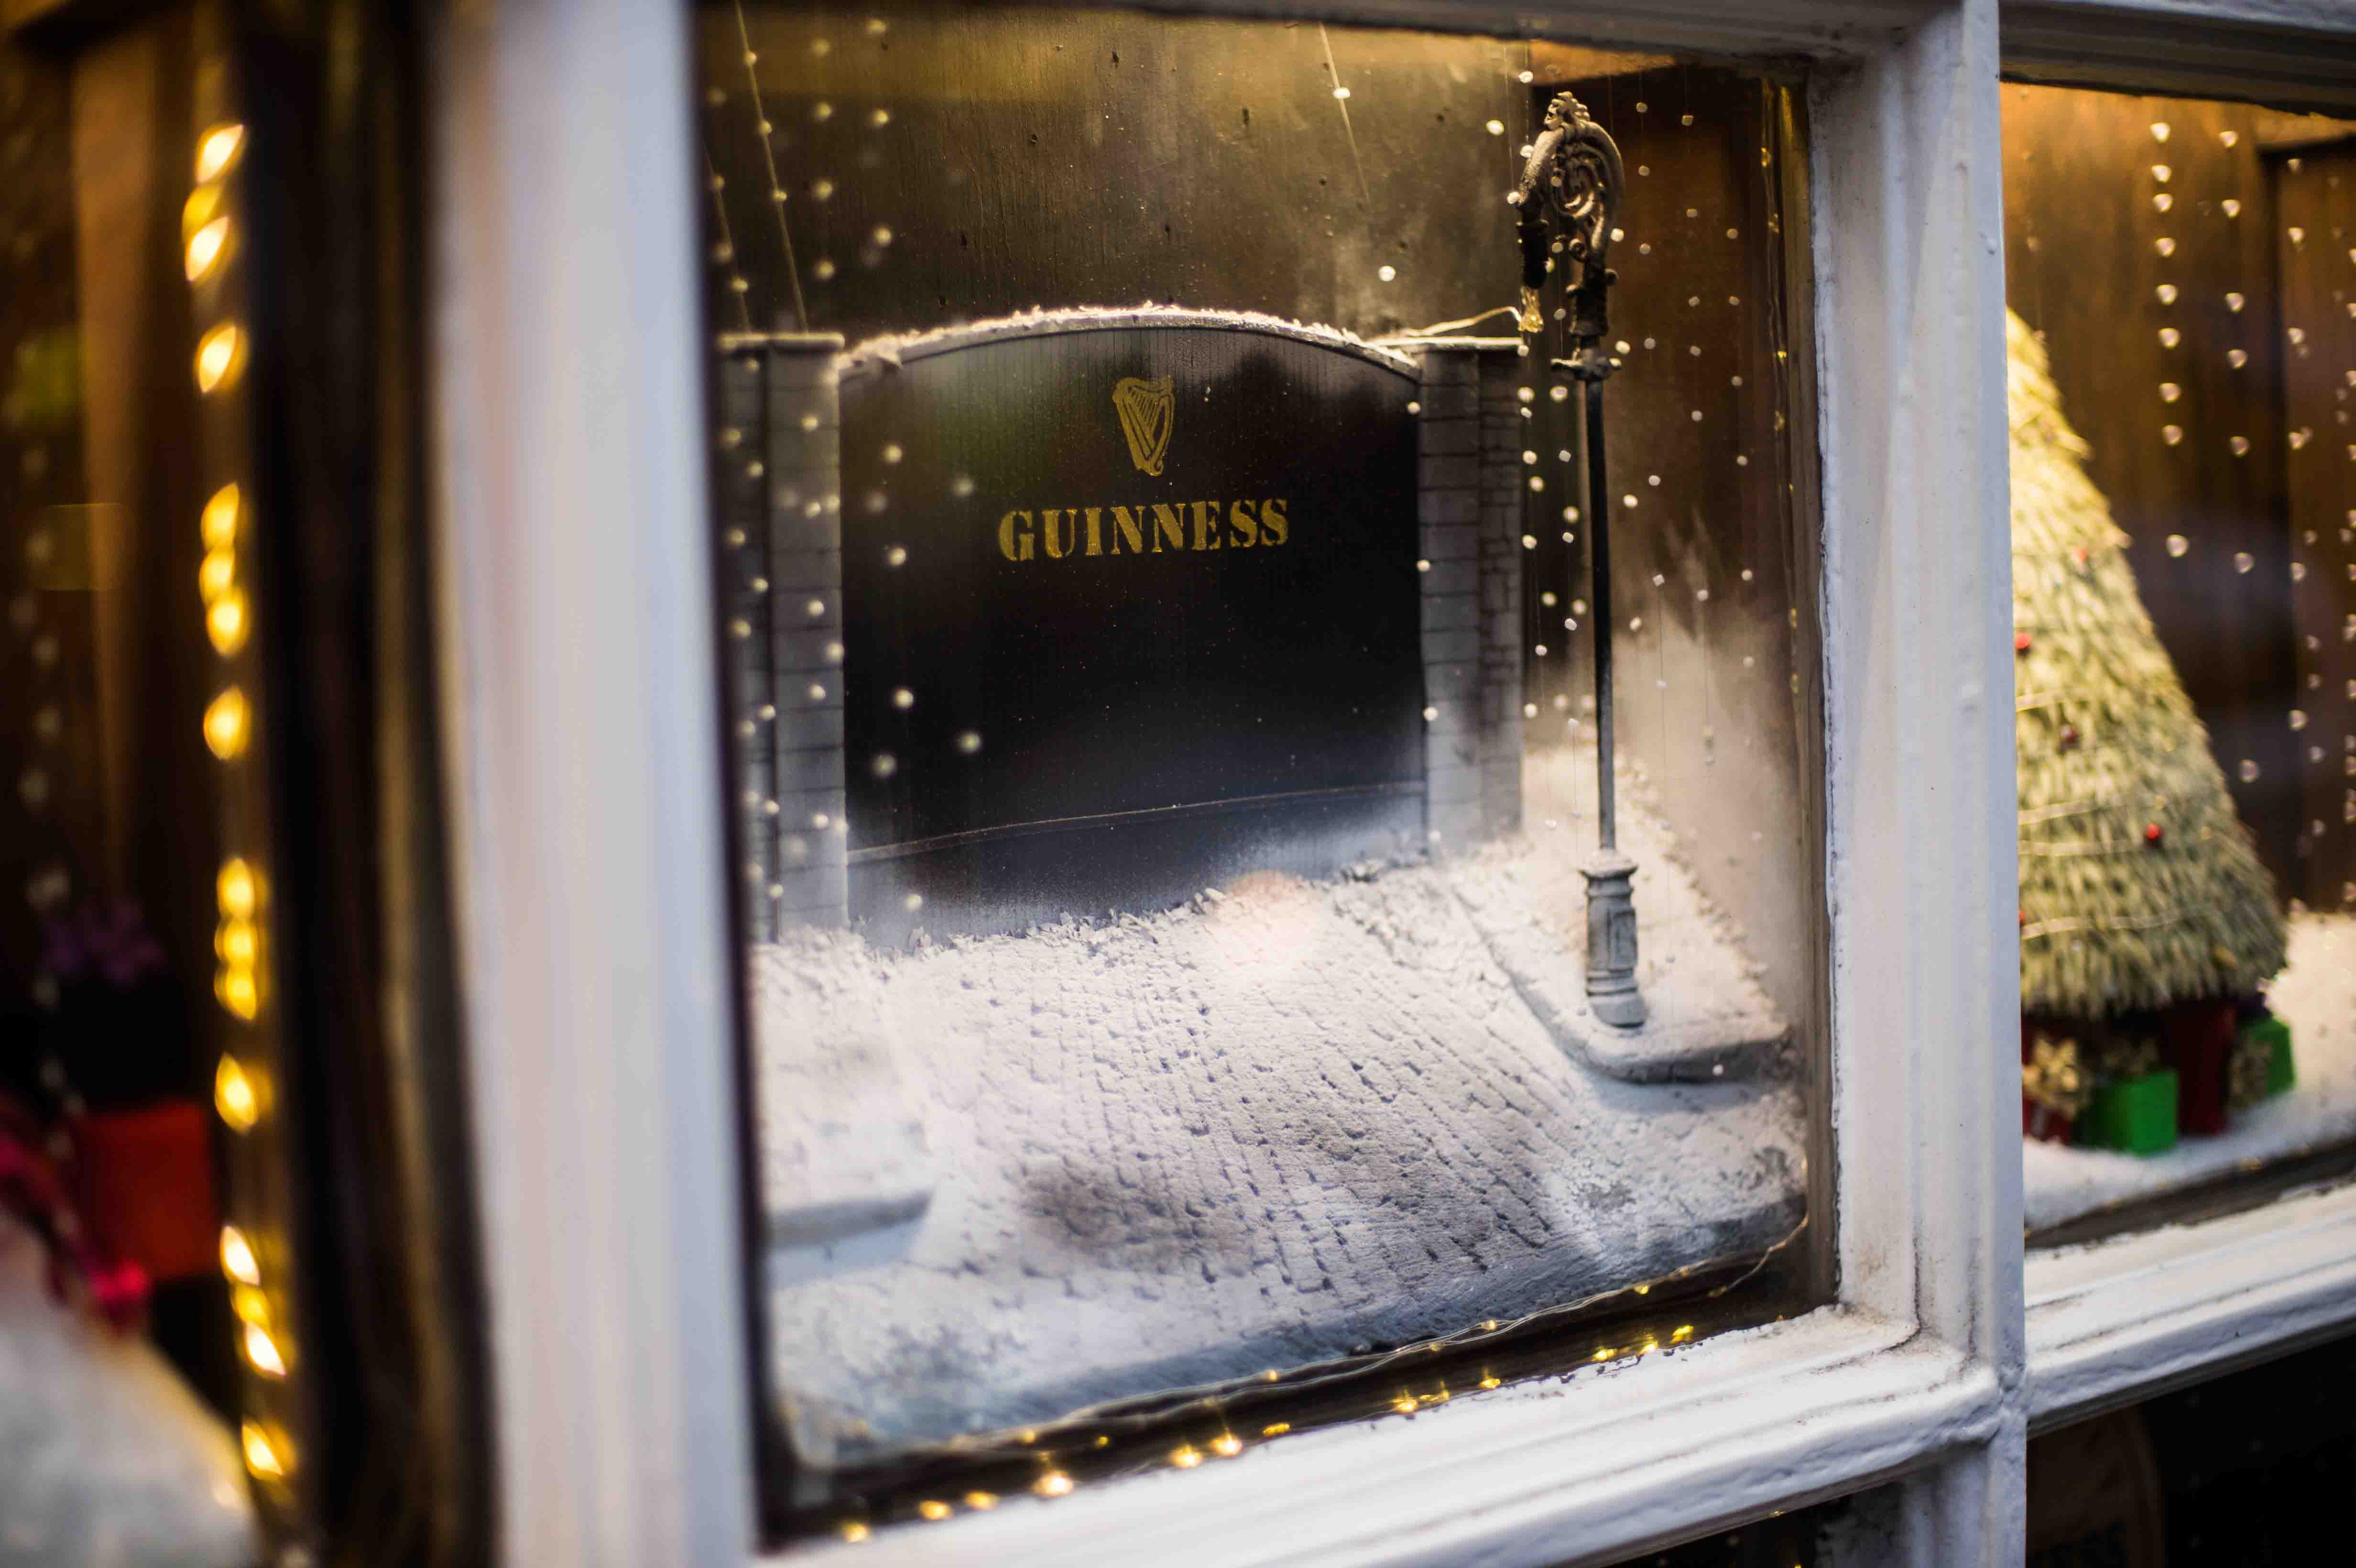 The Bill will mean the end of the iconic Guinness Christmas advert, claims ABFI'sPatricia Callan.